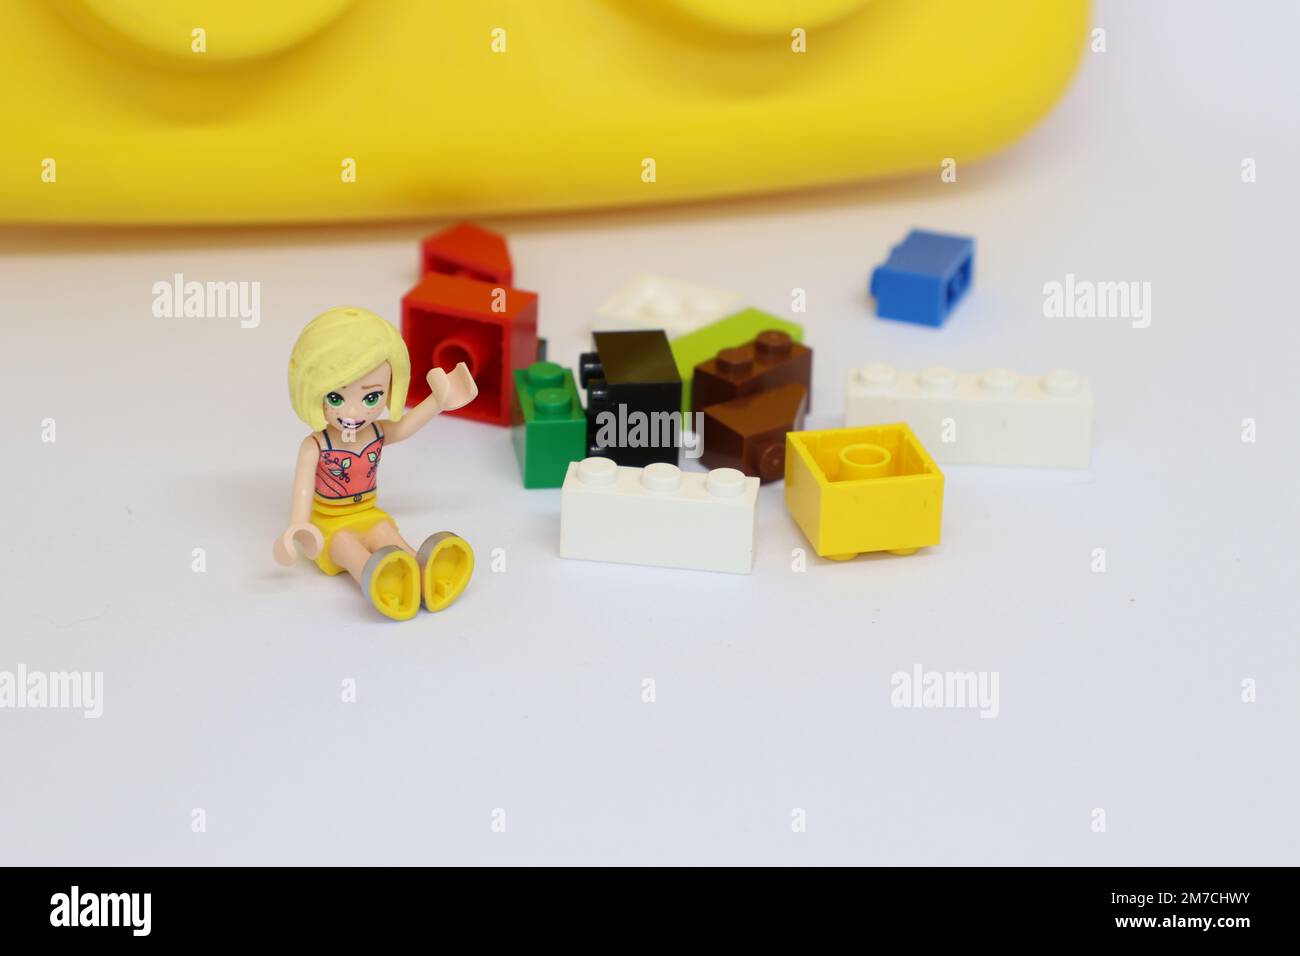 A girl with blonde hair is waving. She is sitting next to scattered lego blocks ann a giant lego block in the background. Stock Photo